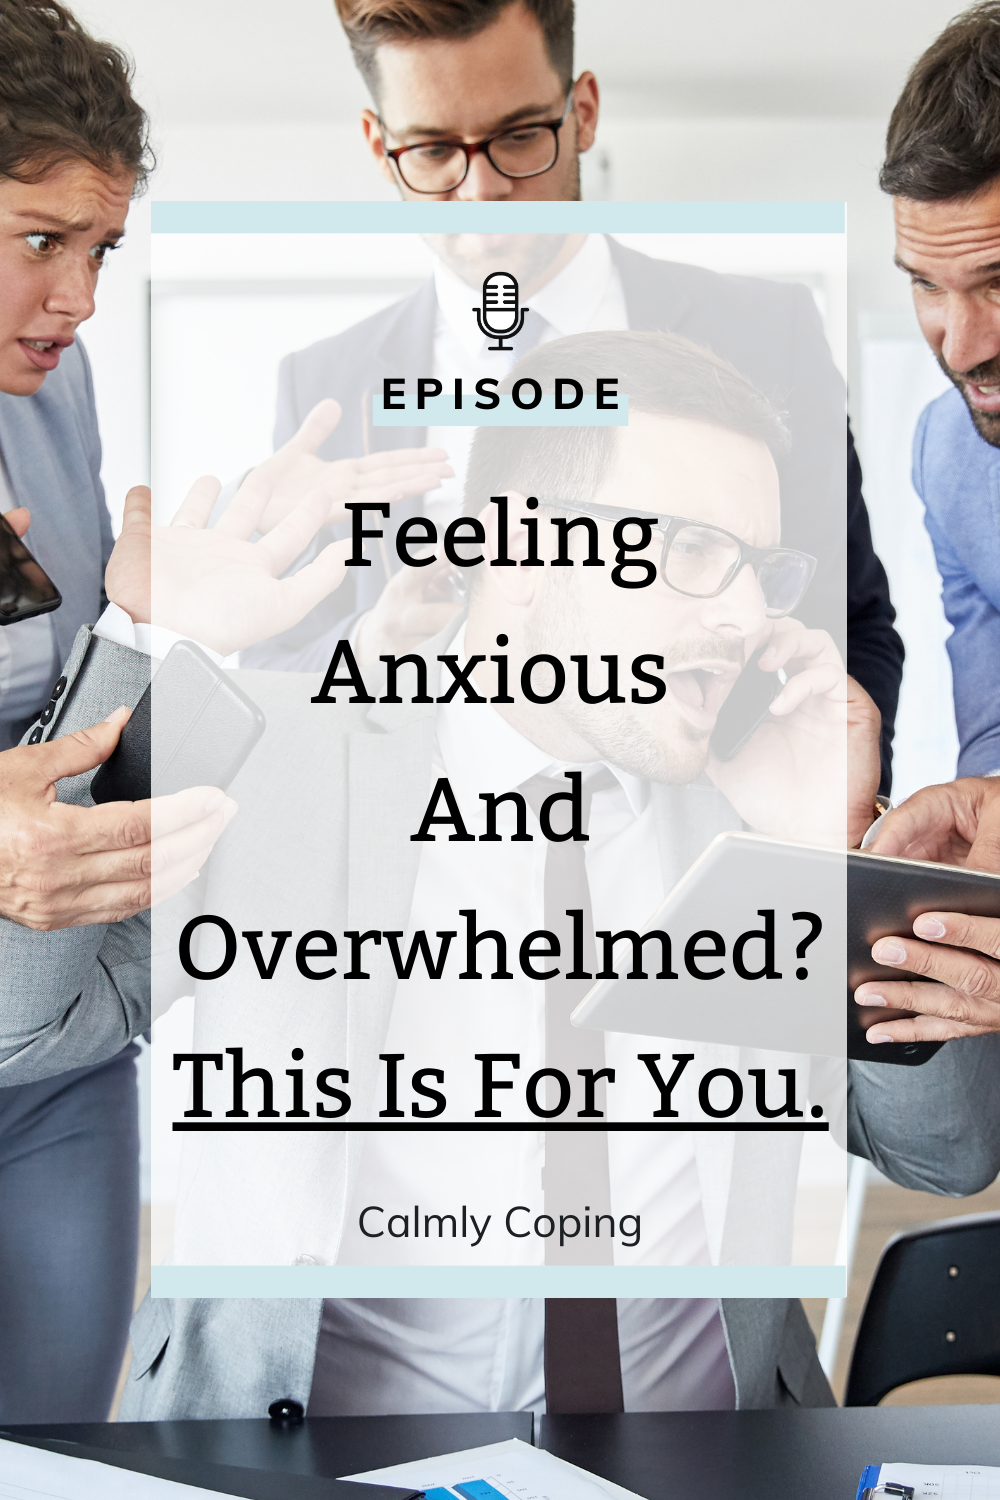 Feeling anxious and overwhelmed? This is for you.